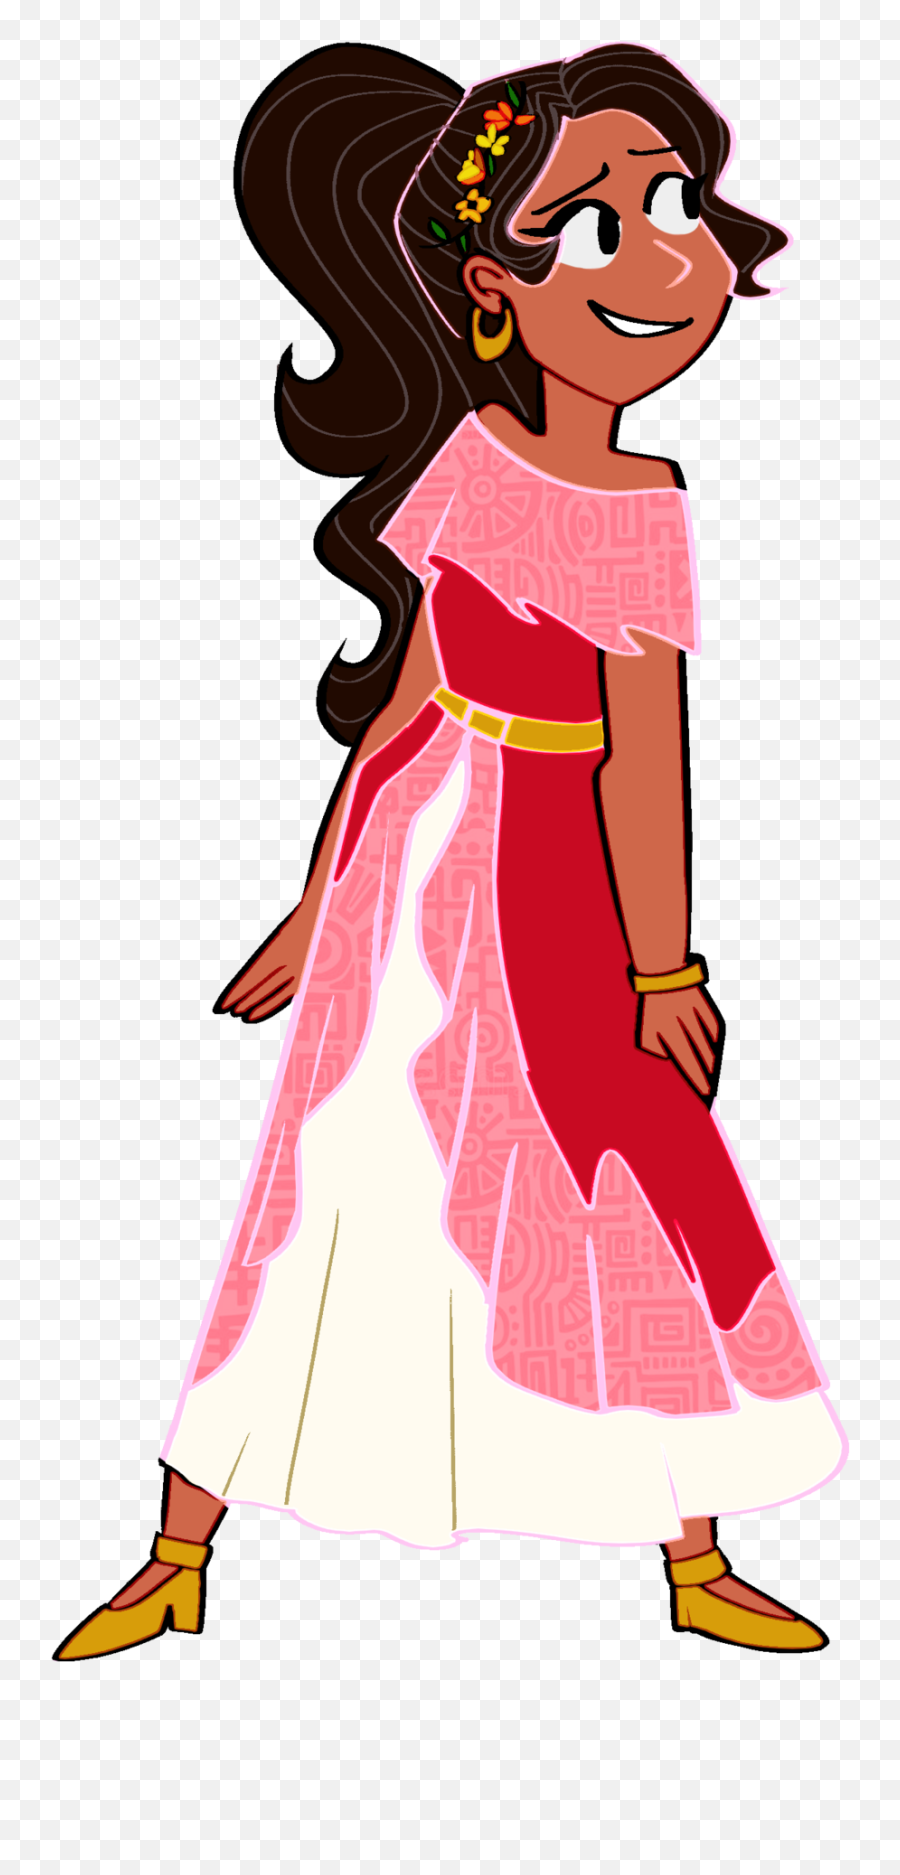 Elena Of Avalor Is One Of My Fave Disney Cartoons - Cartoon Alayna Of Avilor Cartoon Emoji,Disney Emoji Patch